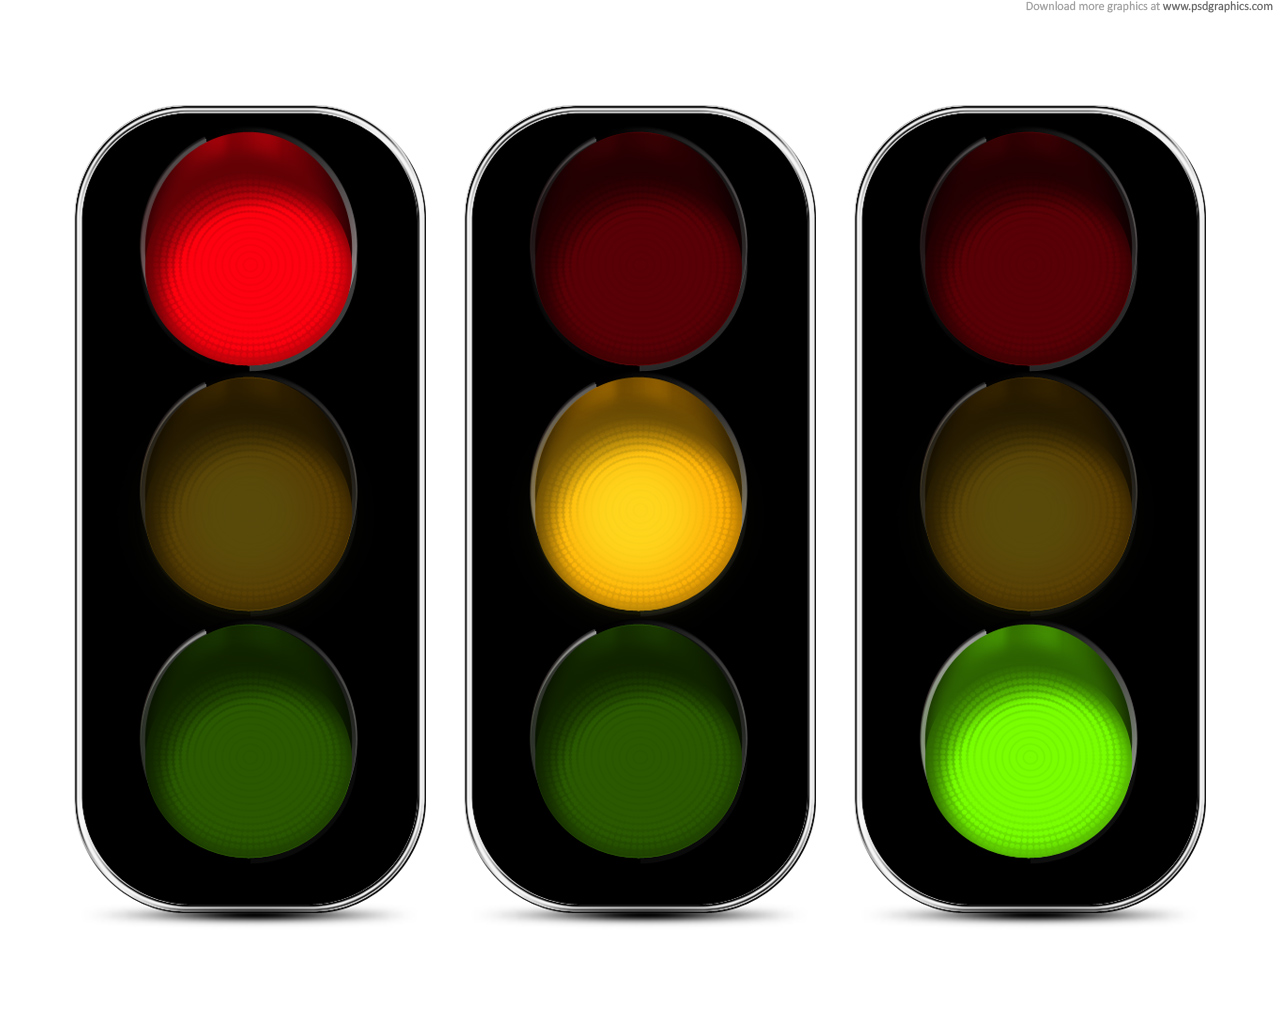 Red Traffic Light Image - ClipArt Best